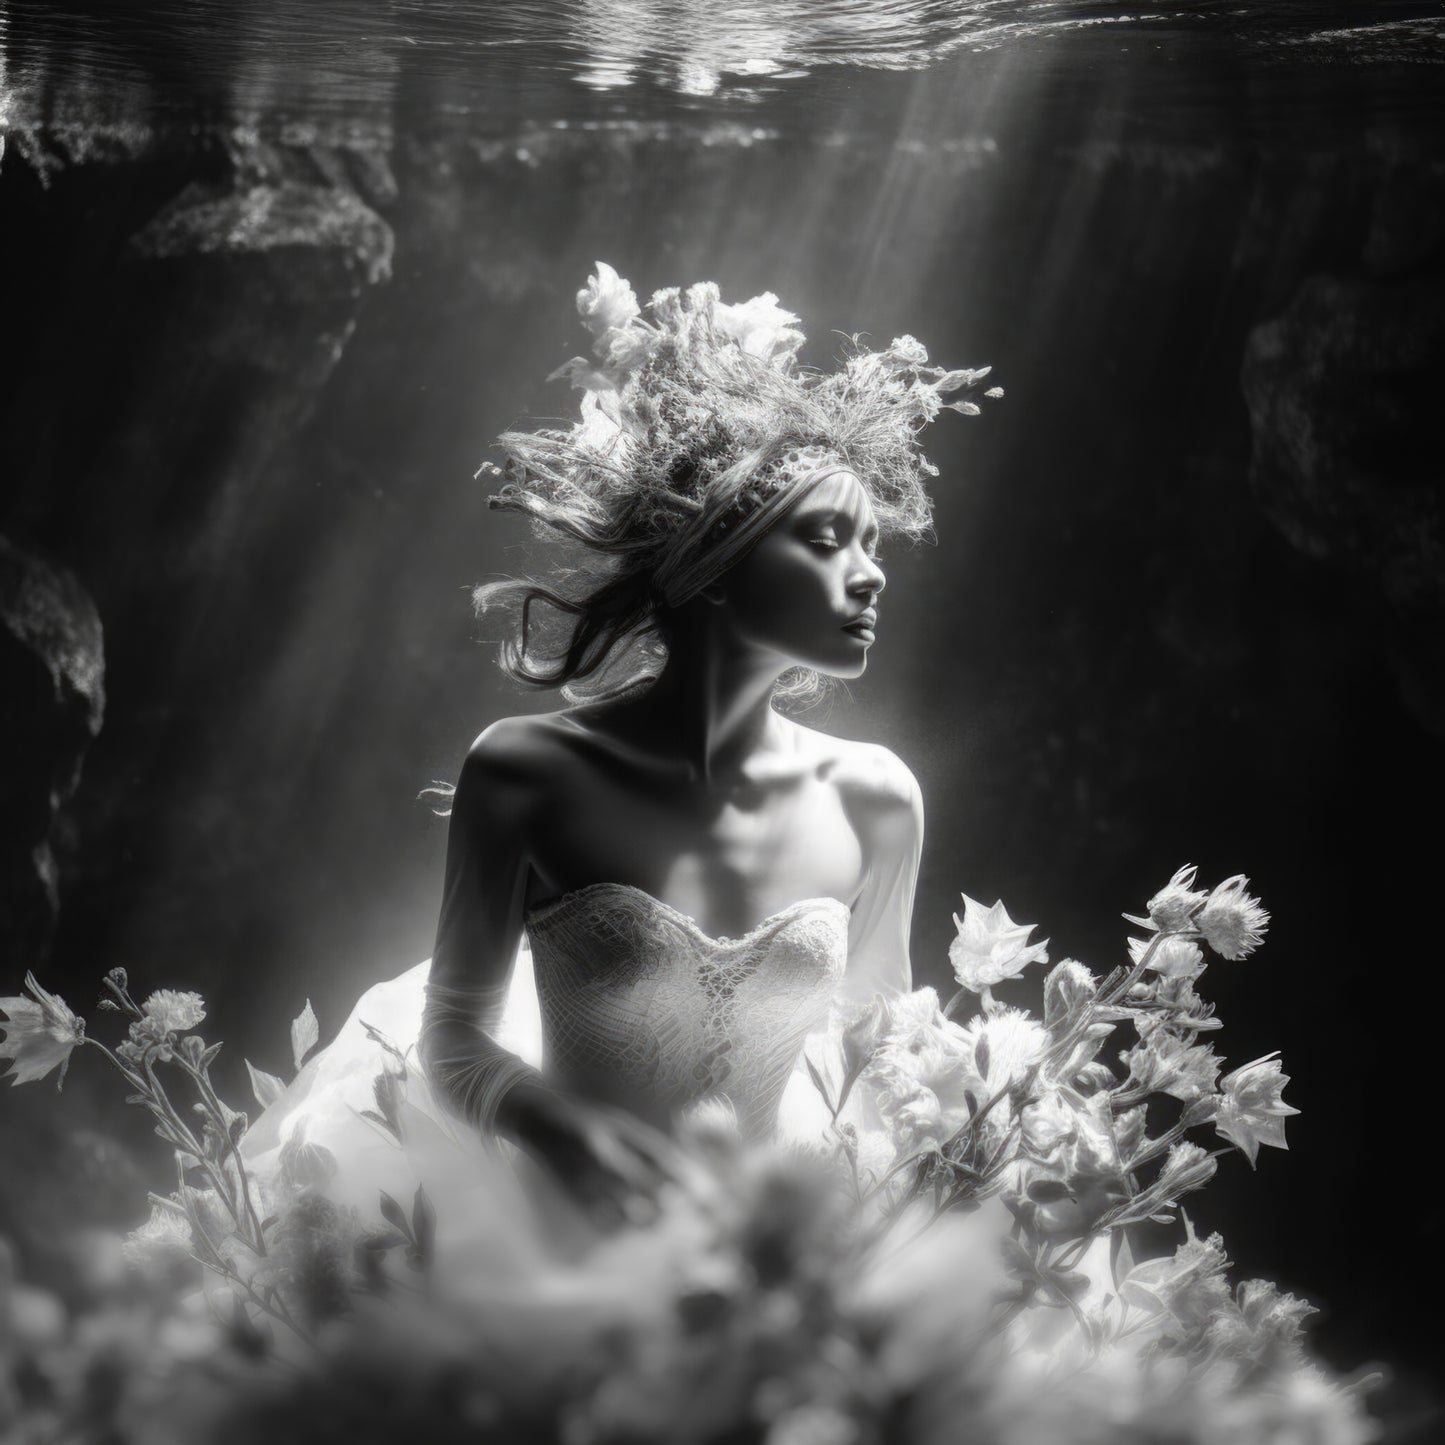 Fine art print of an ethereal woman underwater with flowers from the Siren Song Mermaid Collection.